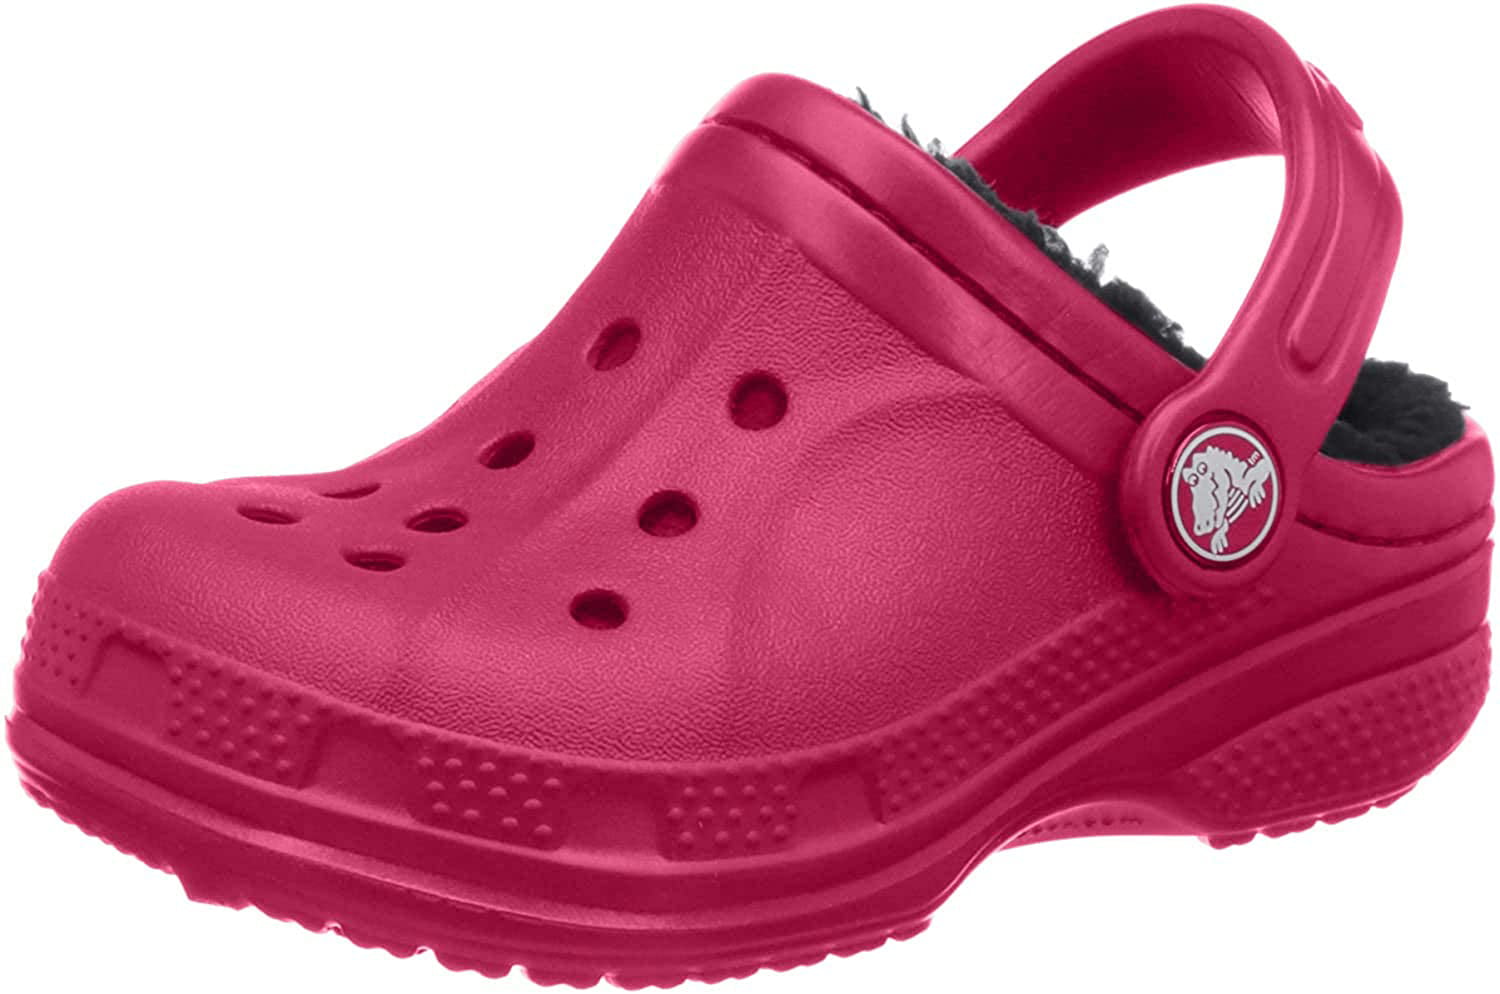 NEW Crocs Kids Girls Toddler US 6/7 Mammoth Lined Removable Clog Slip On Pink 